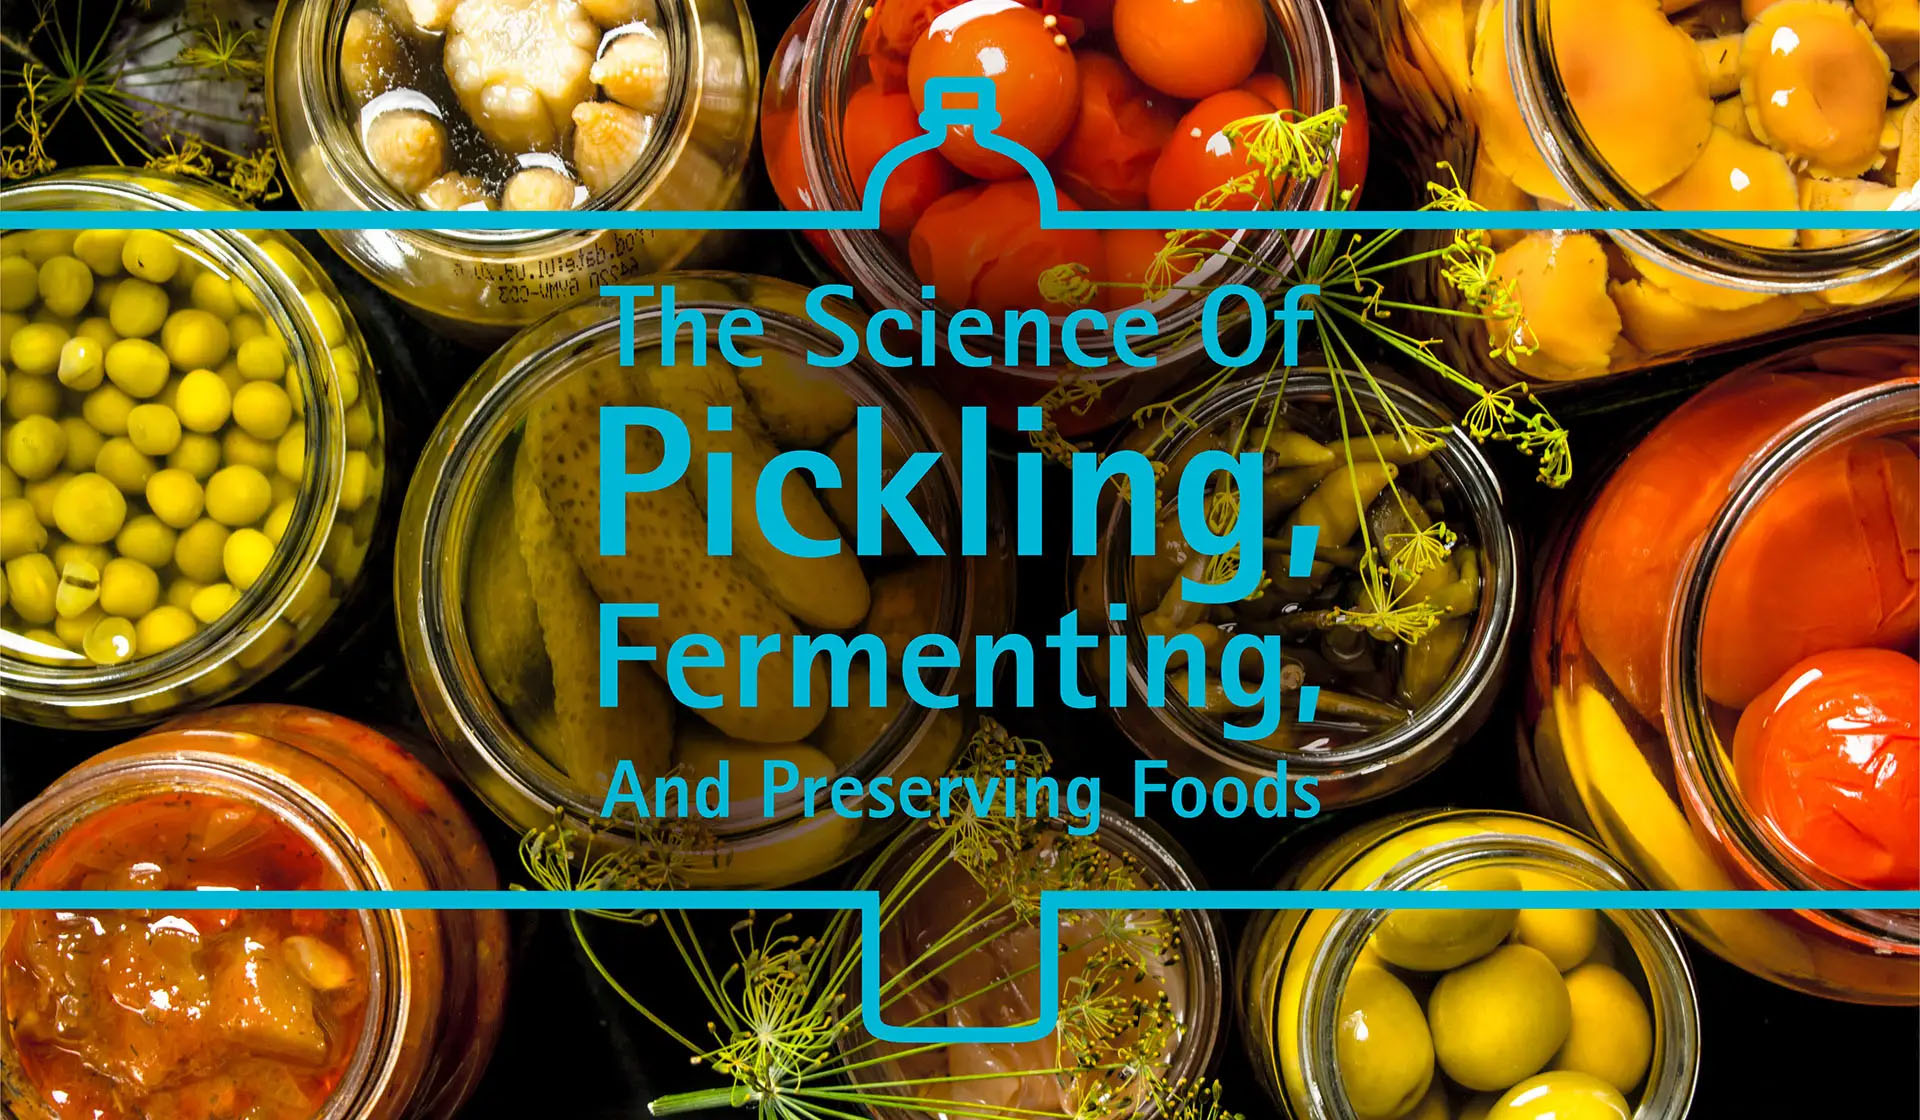 The Science of Pickling, Fermenting, and Preserving Foods